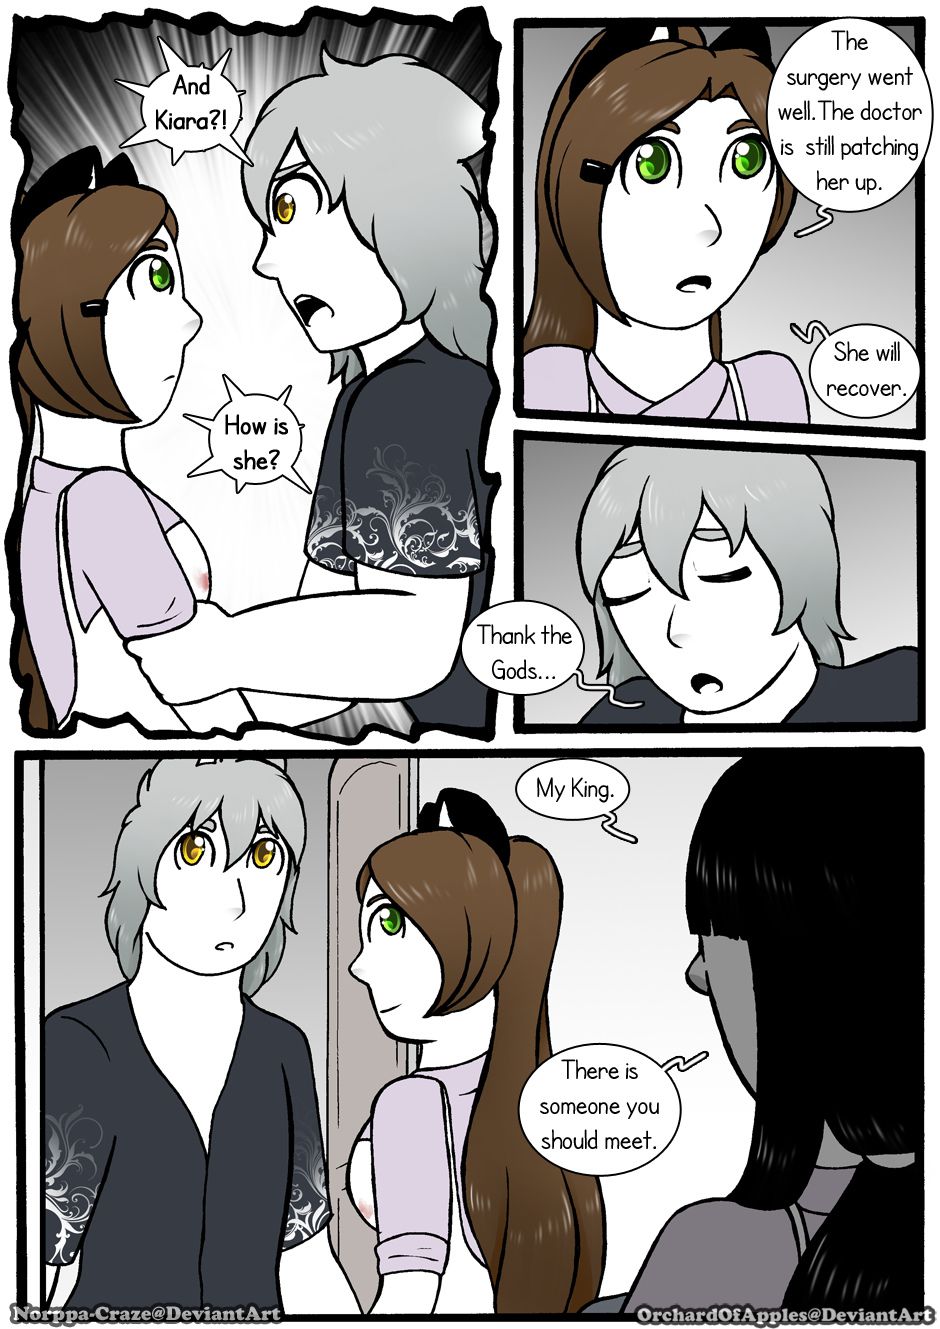 [Jeny-jen94] Between Kings and Queens [Ongoing] 327